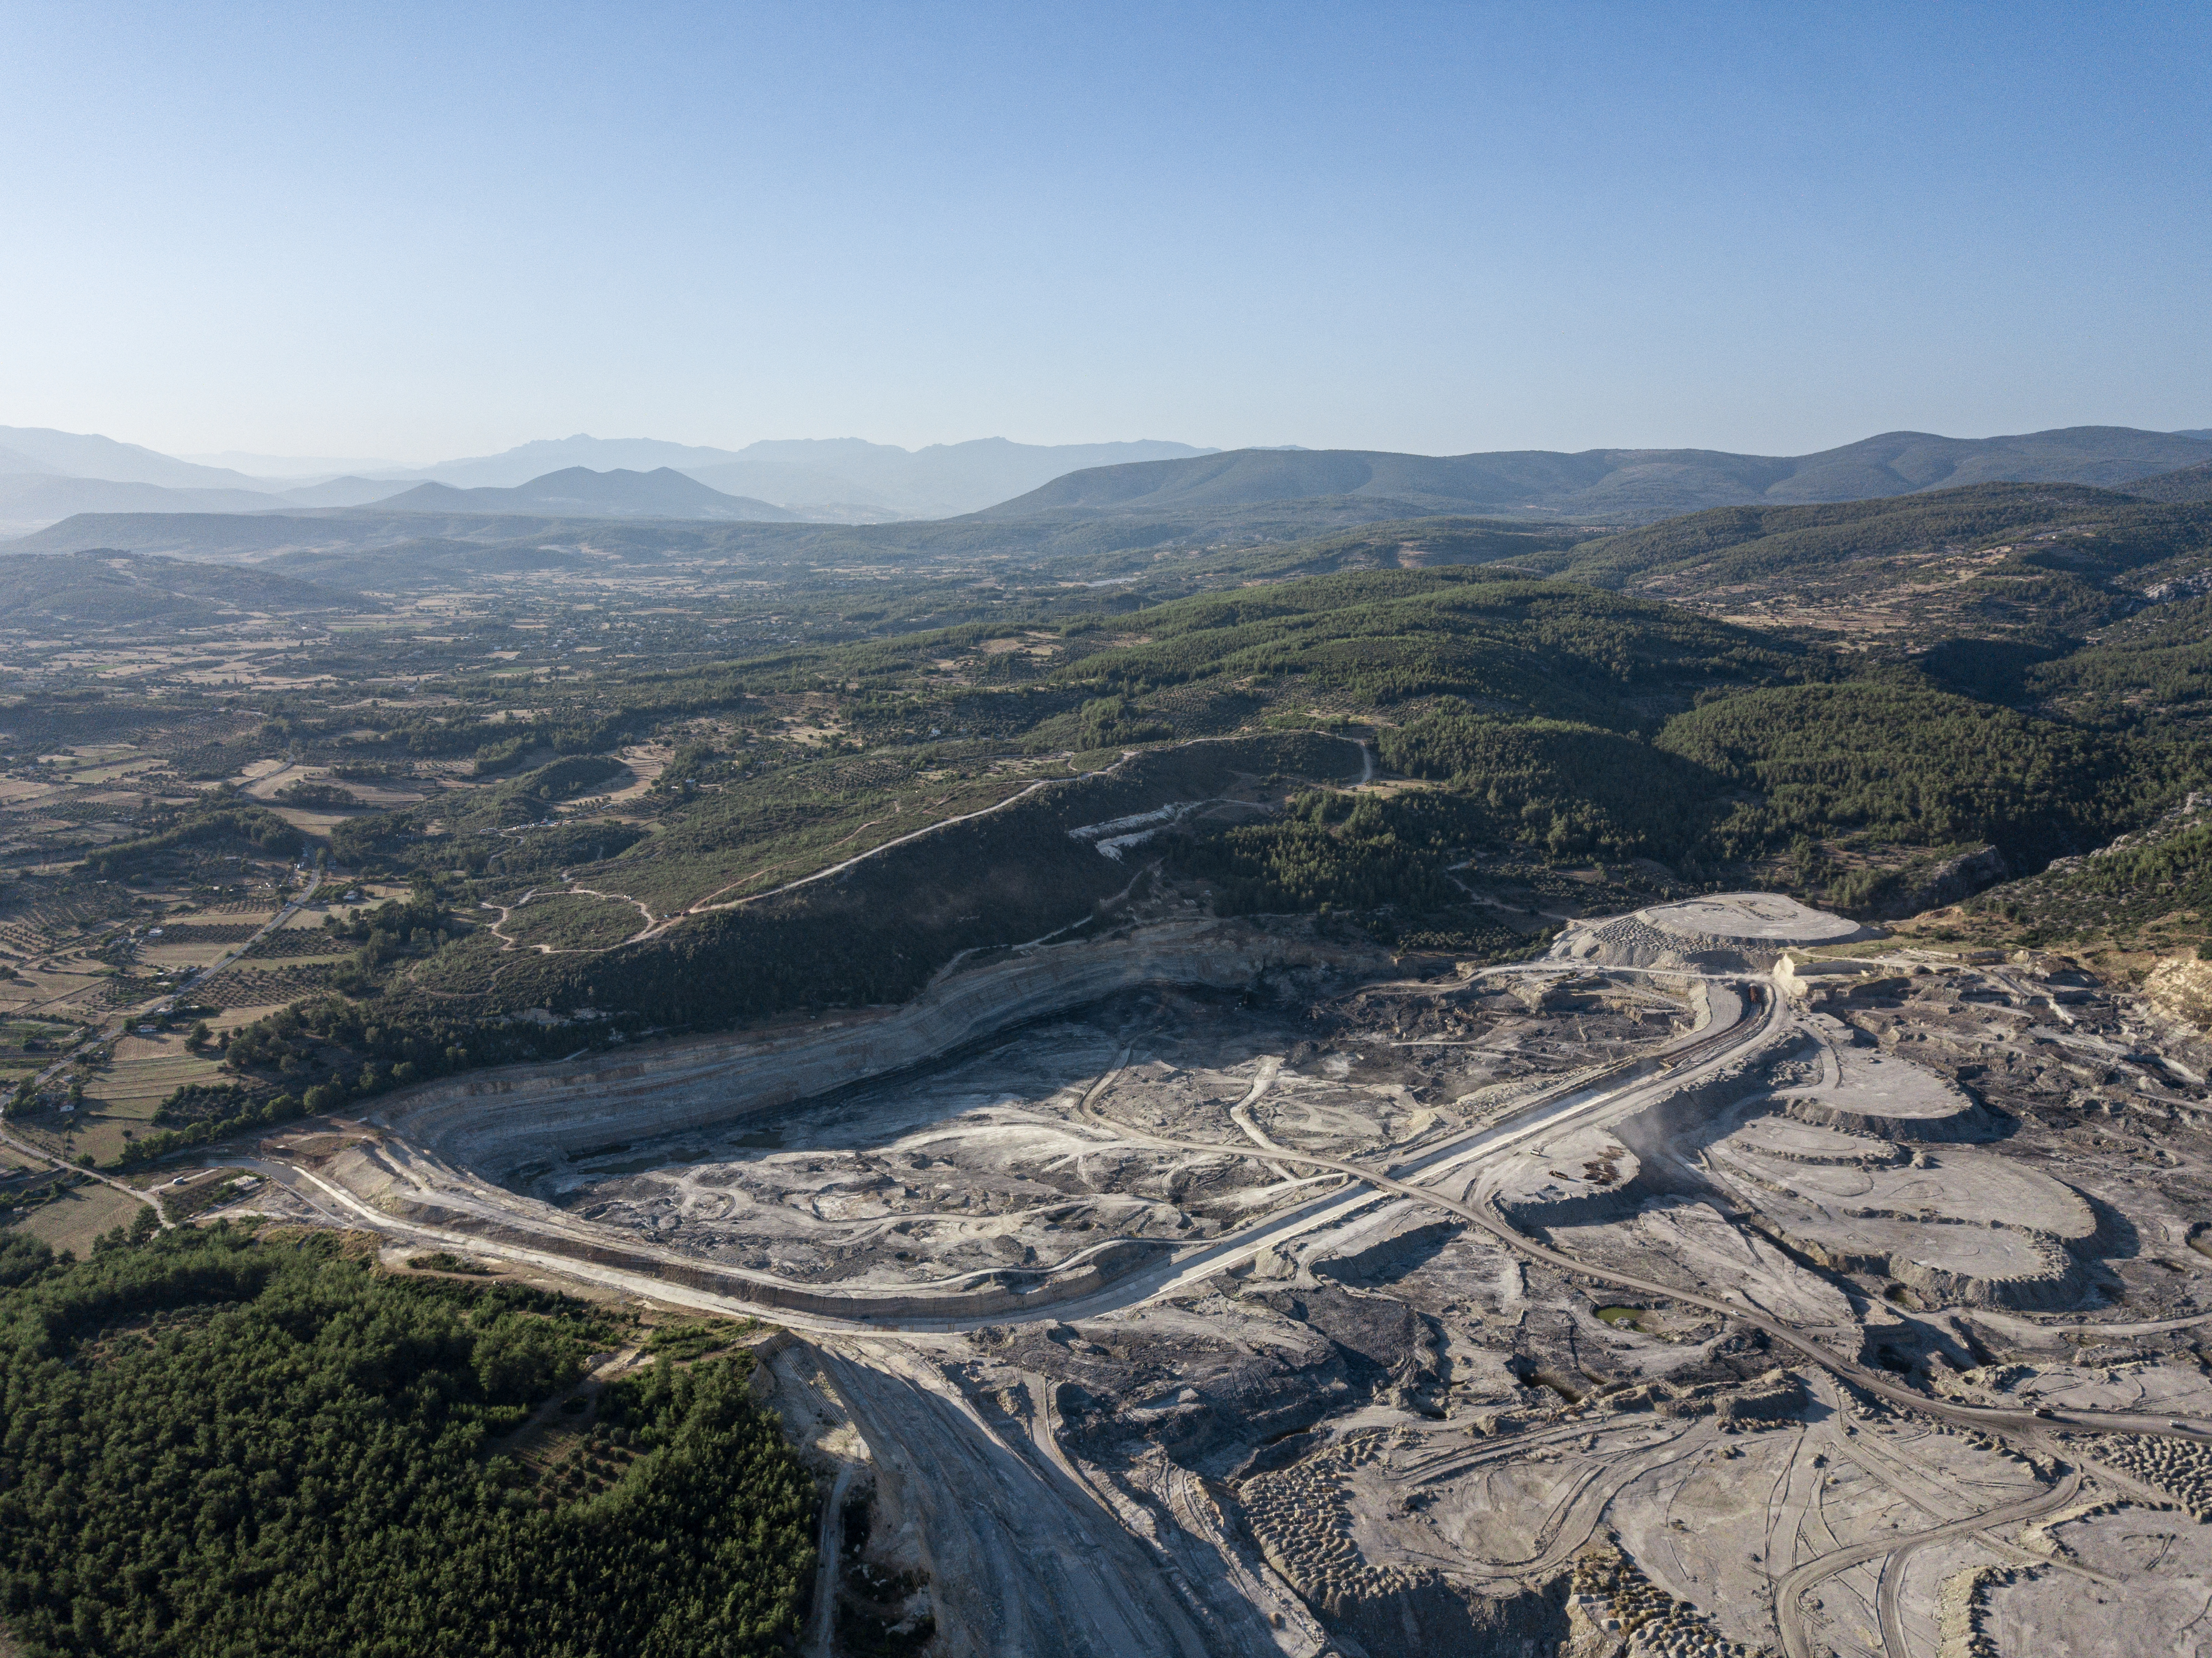 YK Energy, a joint affiliate of IC Holding and Limak Holding, which is known to have close ties with the Turkish government, obtained permission in 2020 to cut down the trees in the 316-hectare section of the Akbelen forest to expand a mine to provide more lignite coal to power plants in the Mugla province. /AFP/Bulent Kilic.